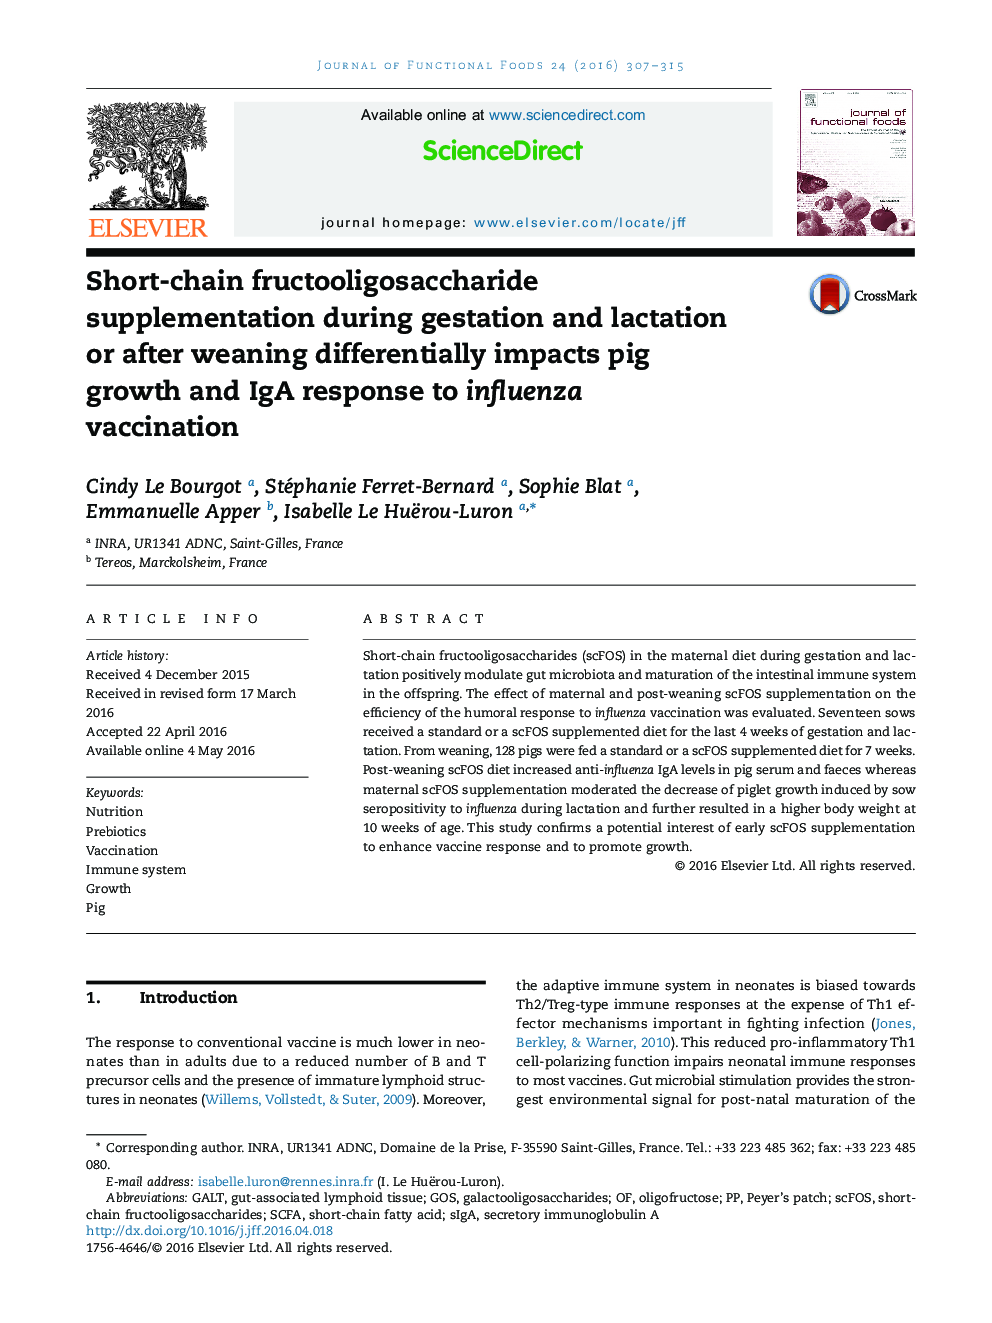 Short-chain fructooligosaccharide supplementation during gestation and lactation or after weaning differentially impacts pig growth and IgA response to influenza vaccination